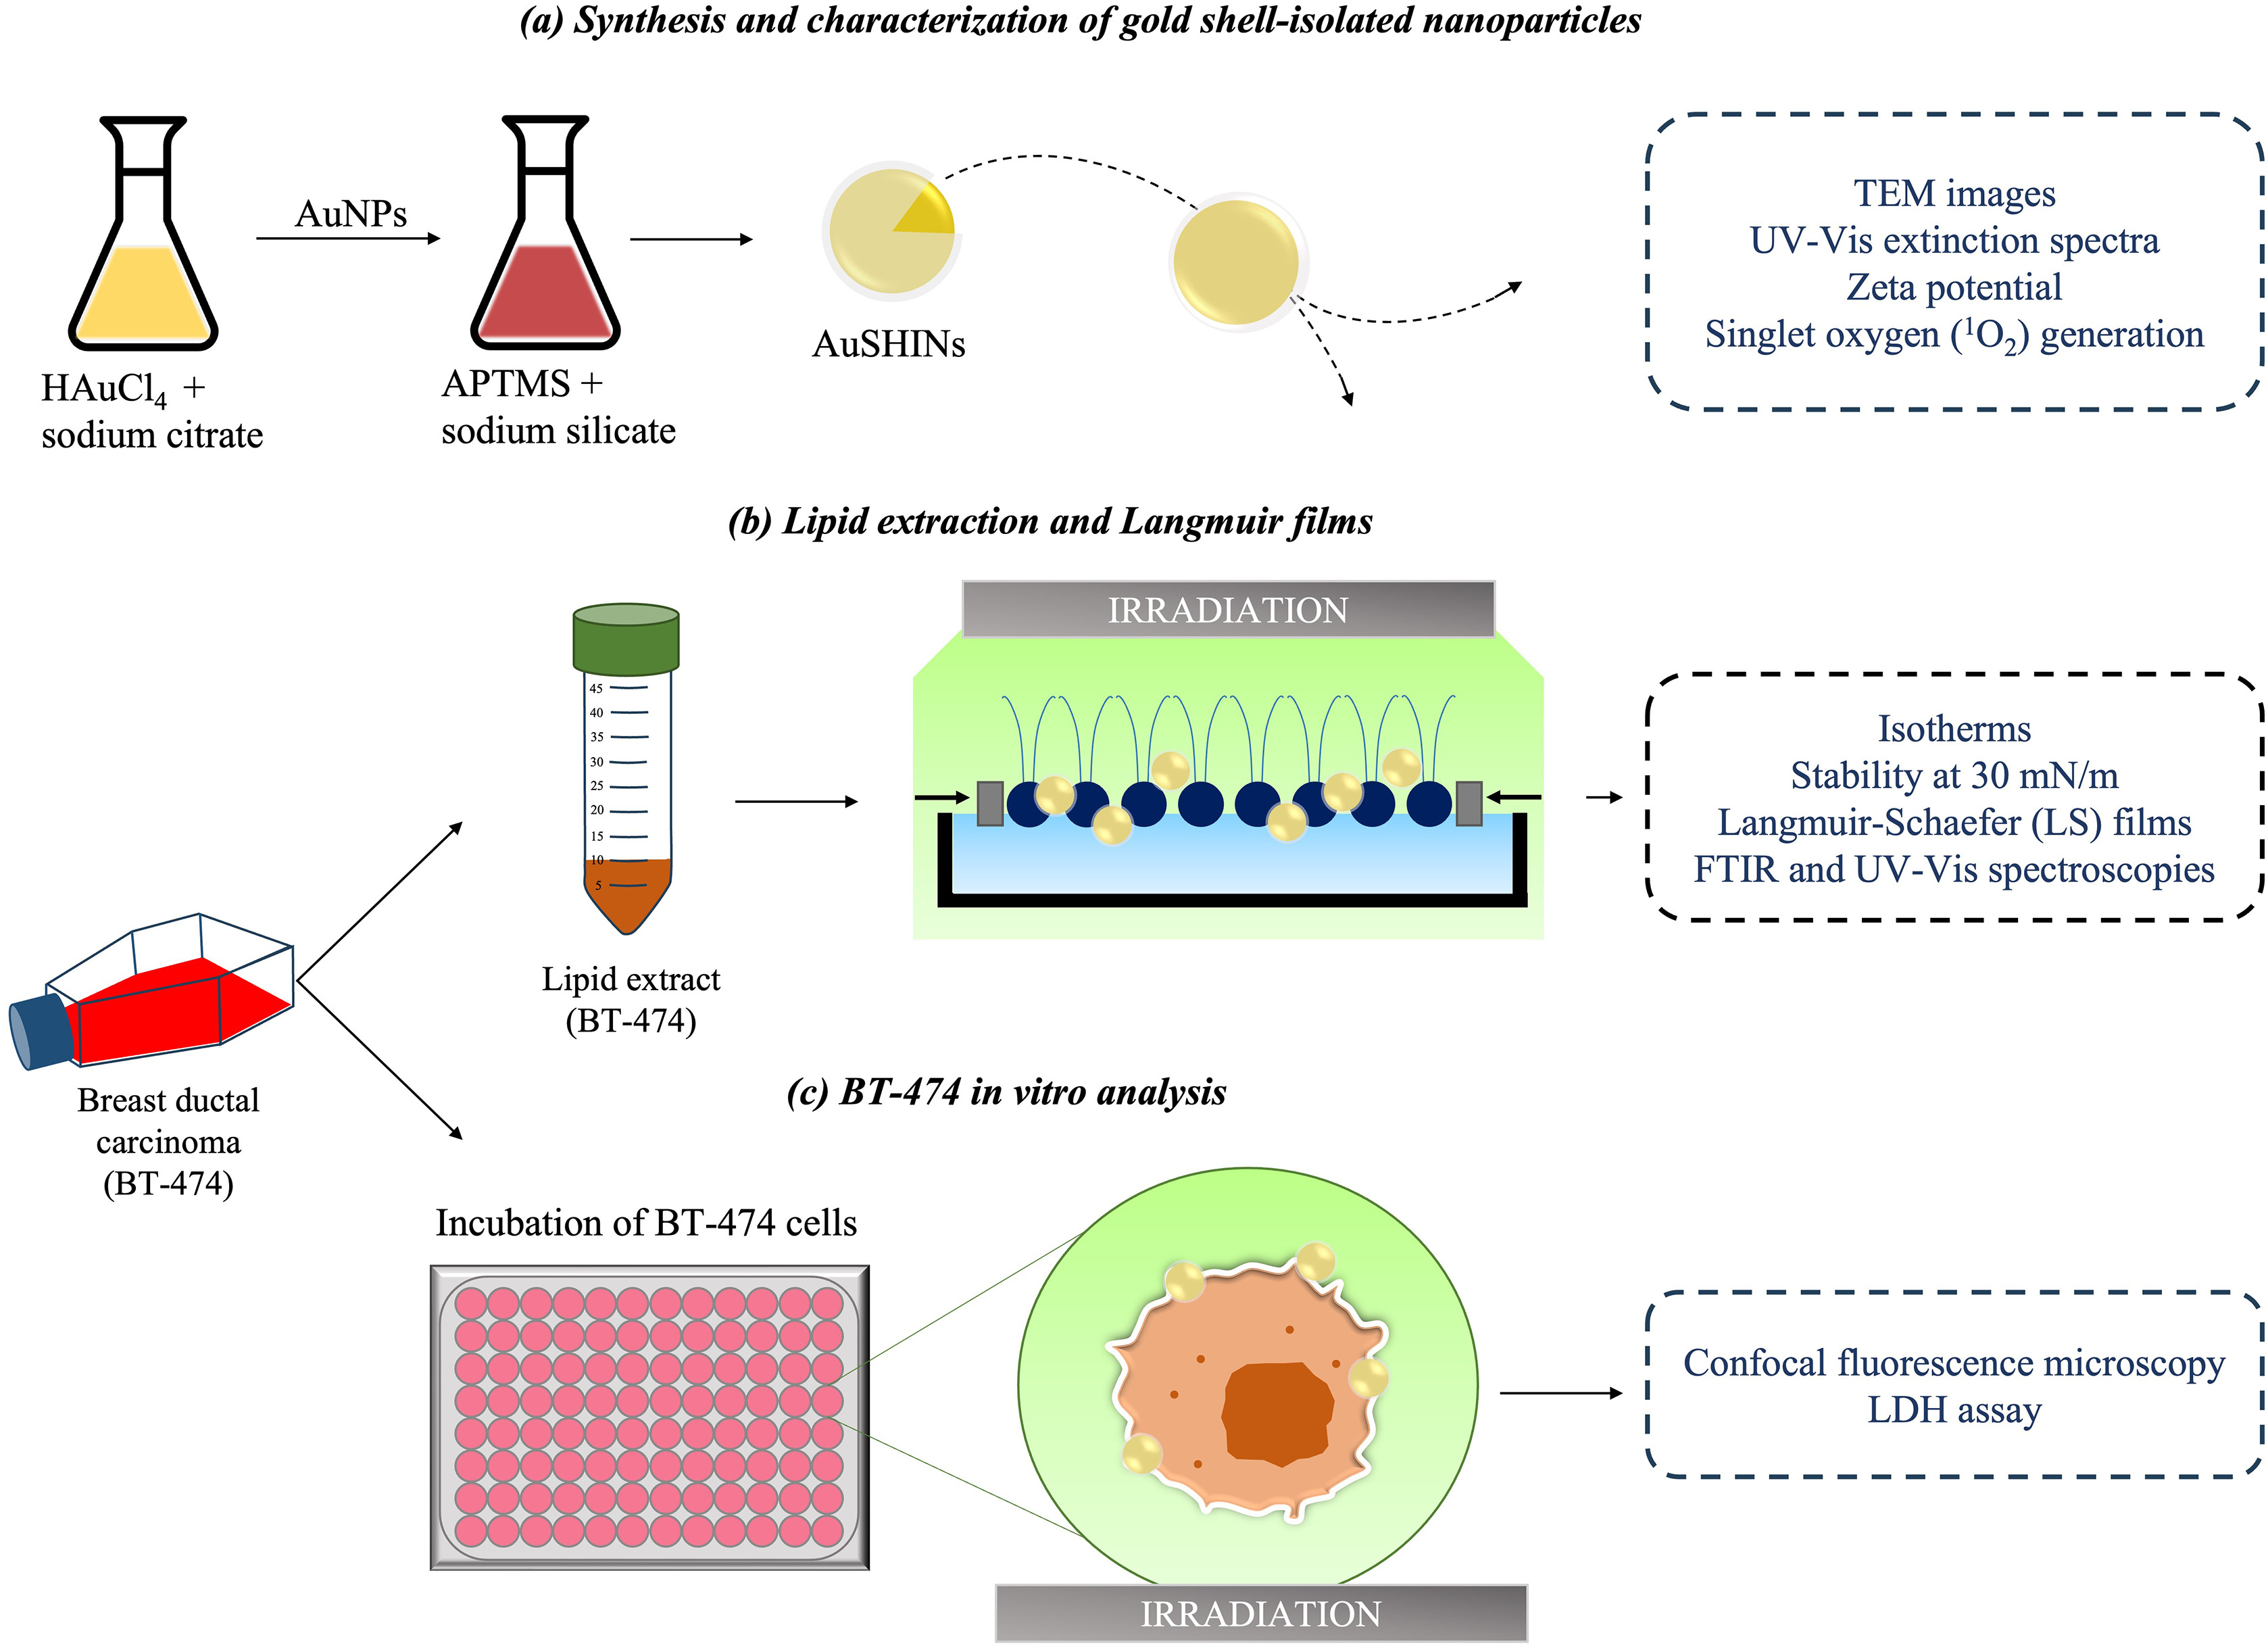 Unveiling the mechanisms underlying photothermal efficiency of gold shell-isolated nanoparticles (AuSHINs) on ductal mammary carcinoma cells (BT-474).